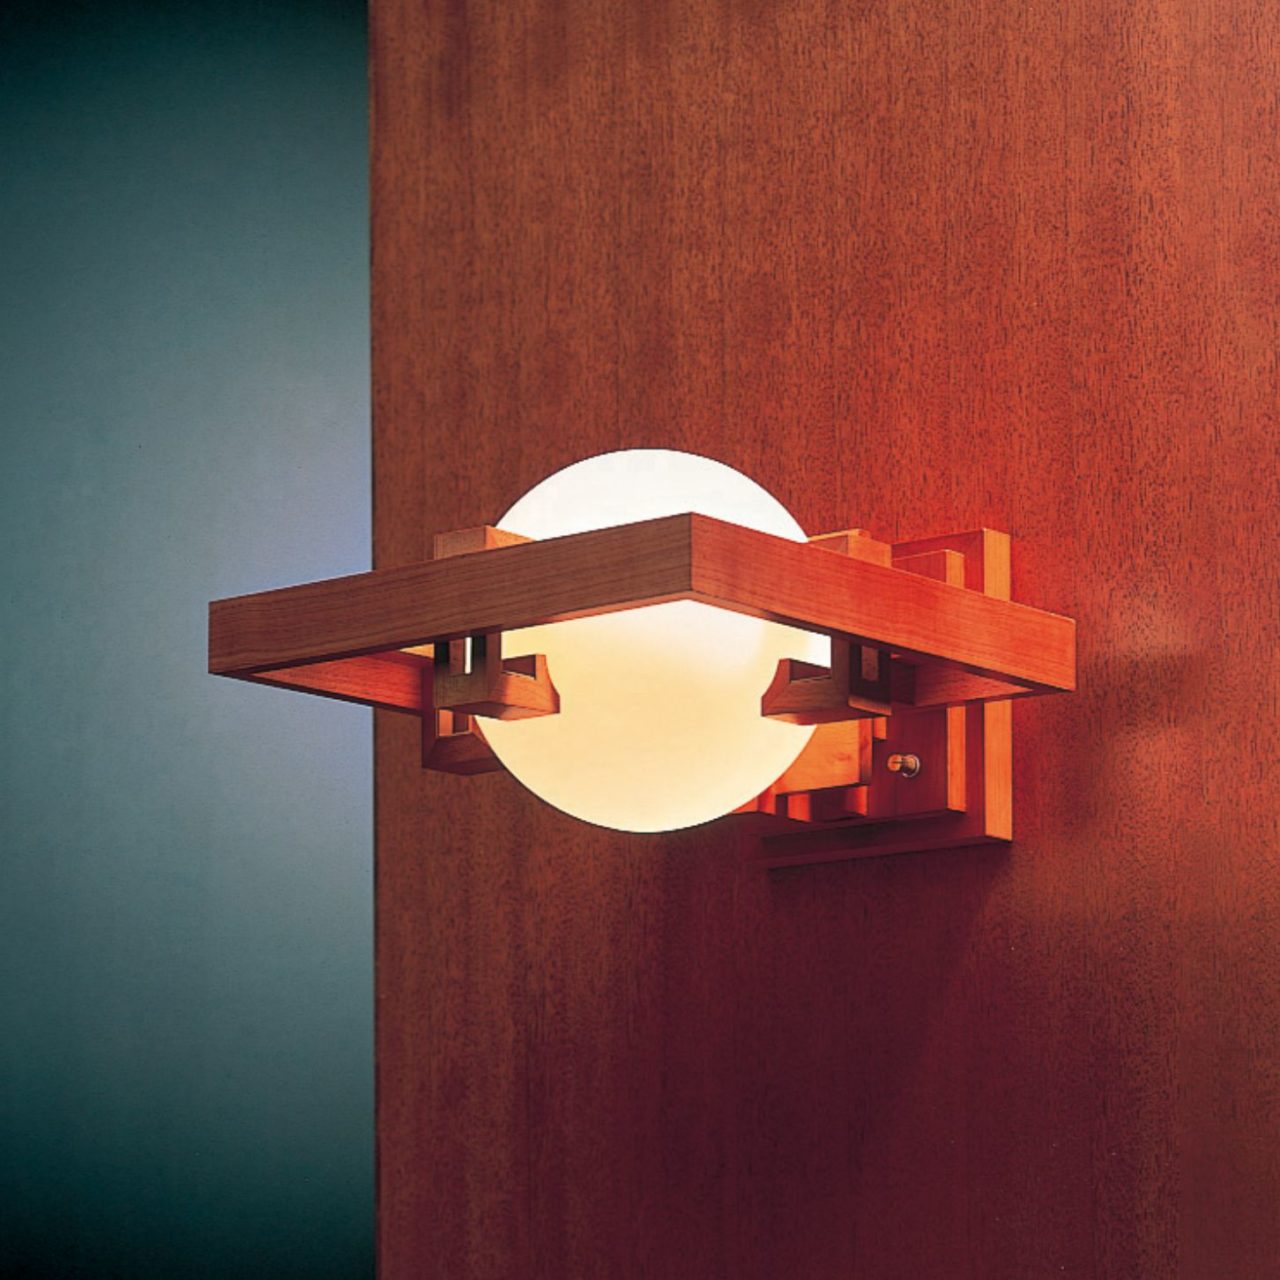 A Lighting Collection Based Off of Lloyd Wright's Architecture